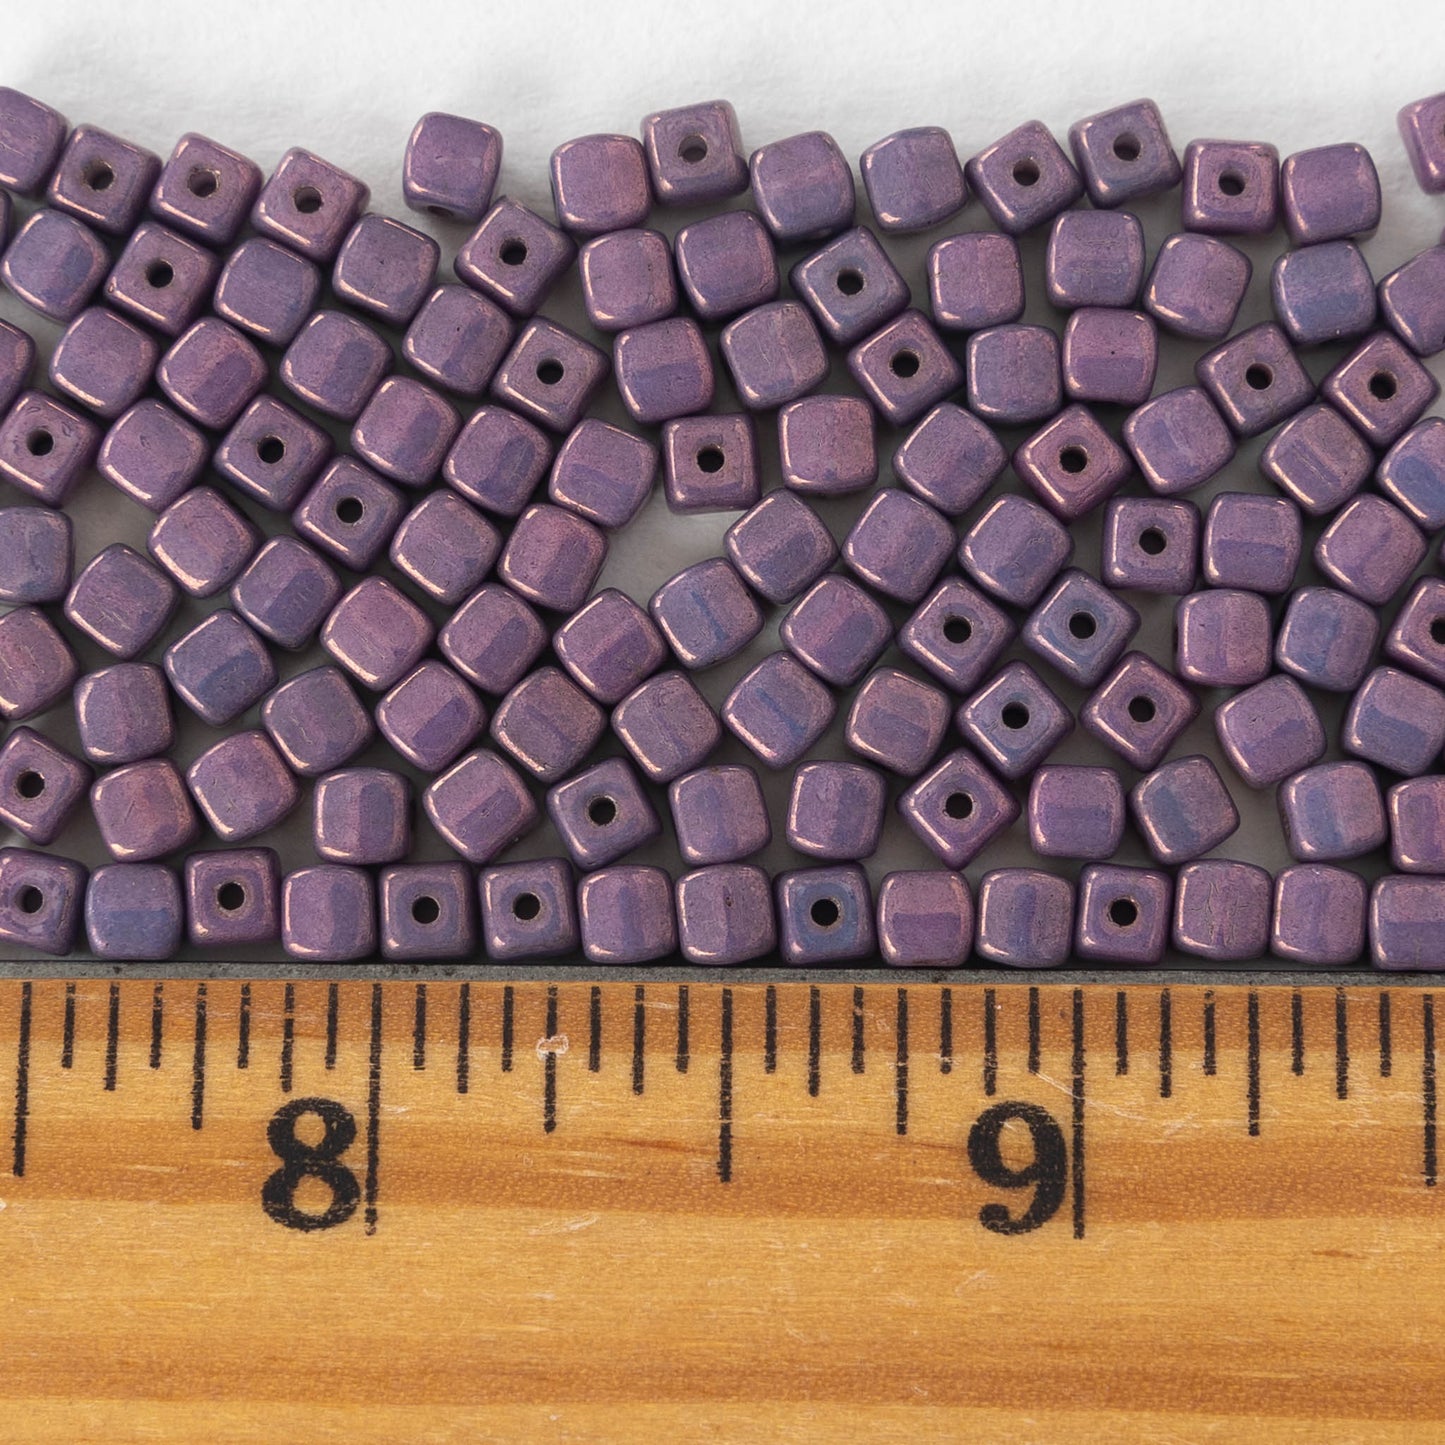 4mm Glass Cube Beads - Opaque Purple Luster - 100 beads